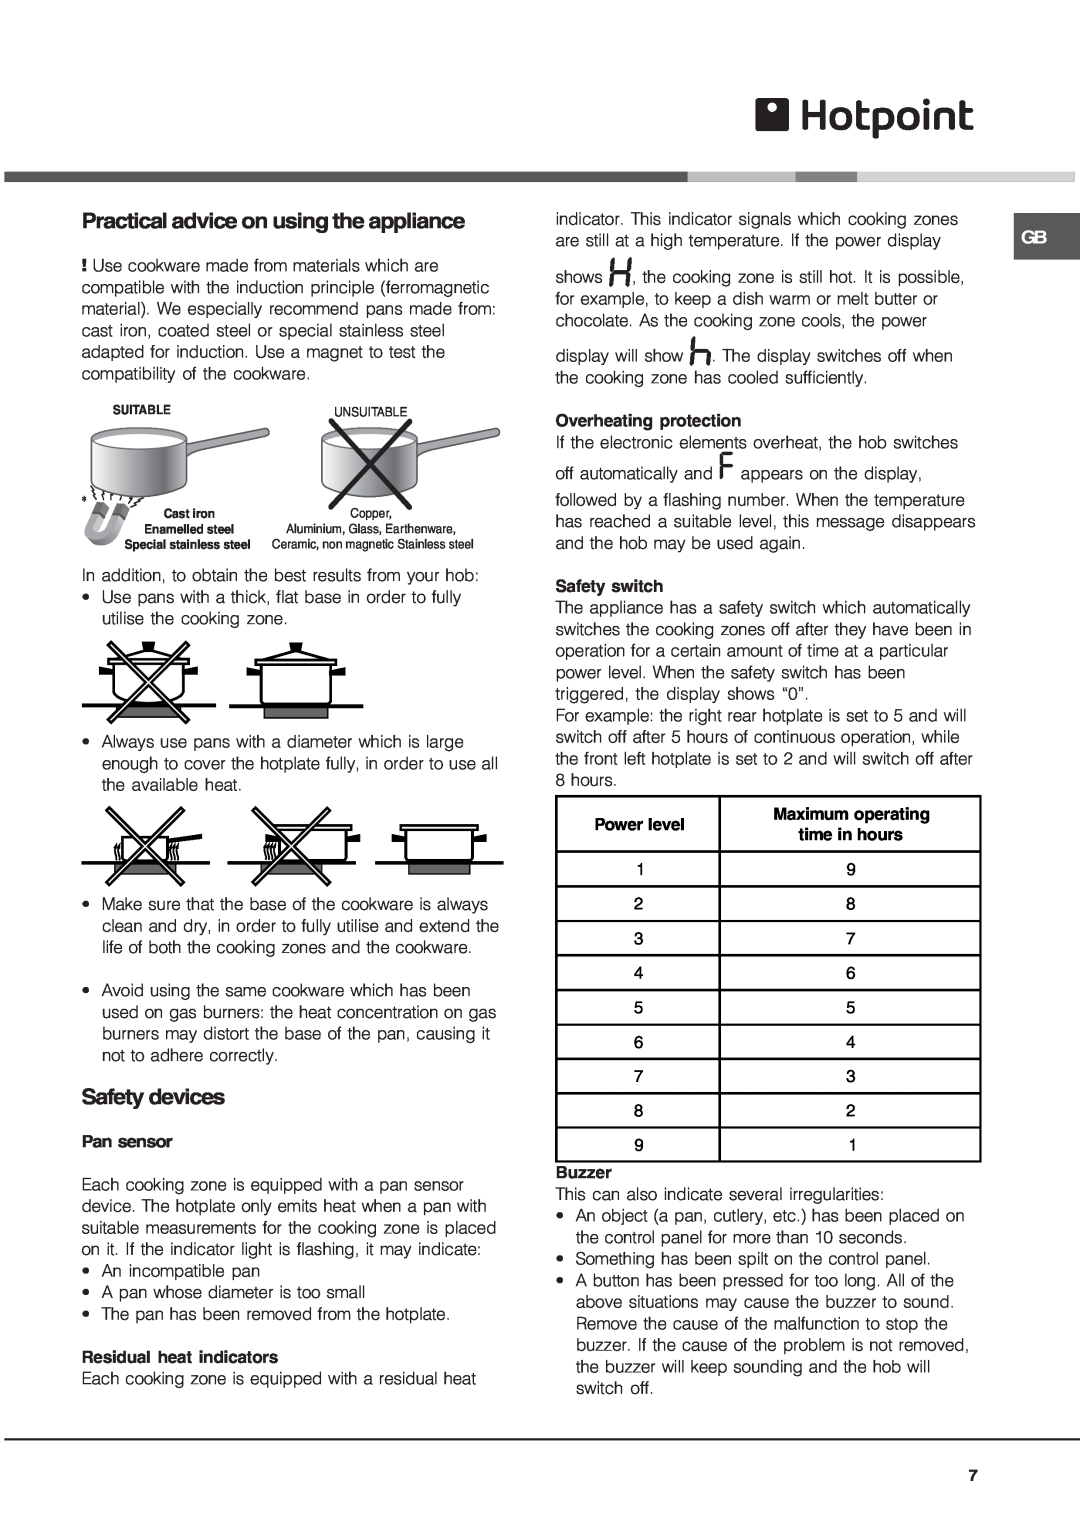 Hotpoint CIC 642 C manual Practical advice on using the appliance, Safety devices 